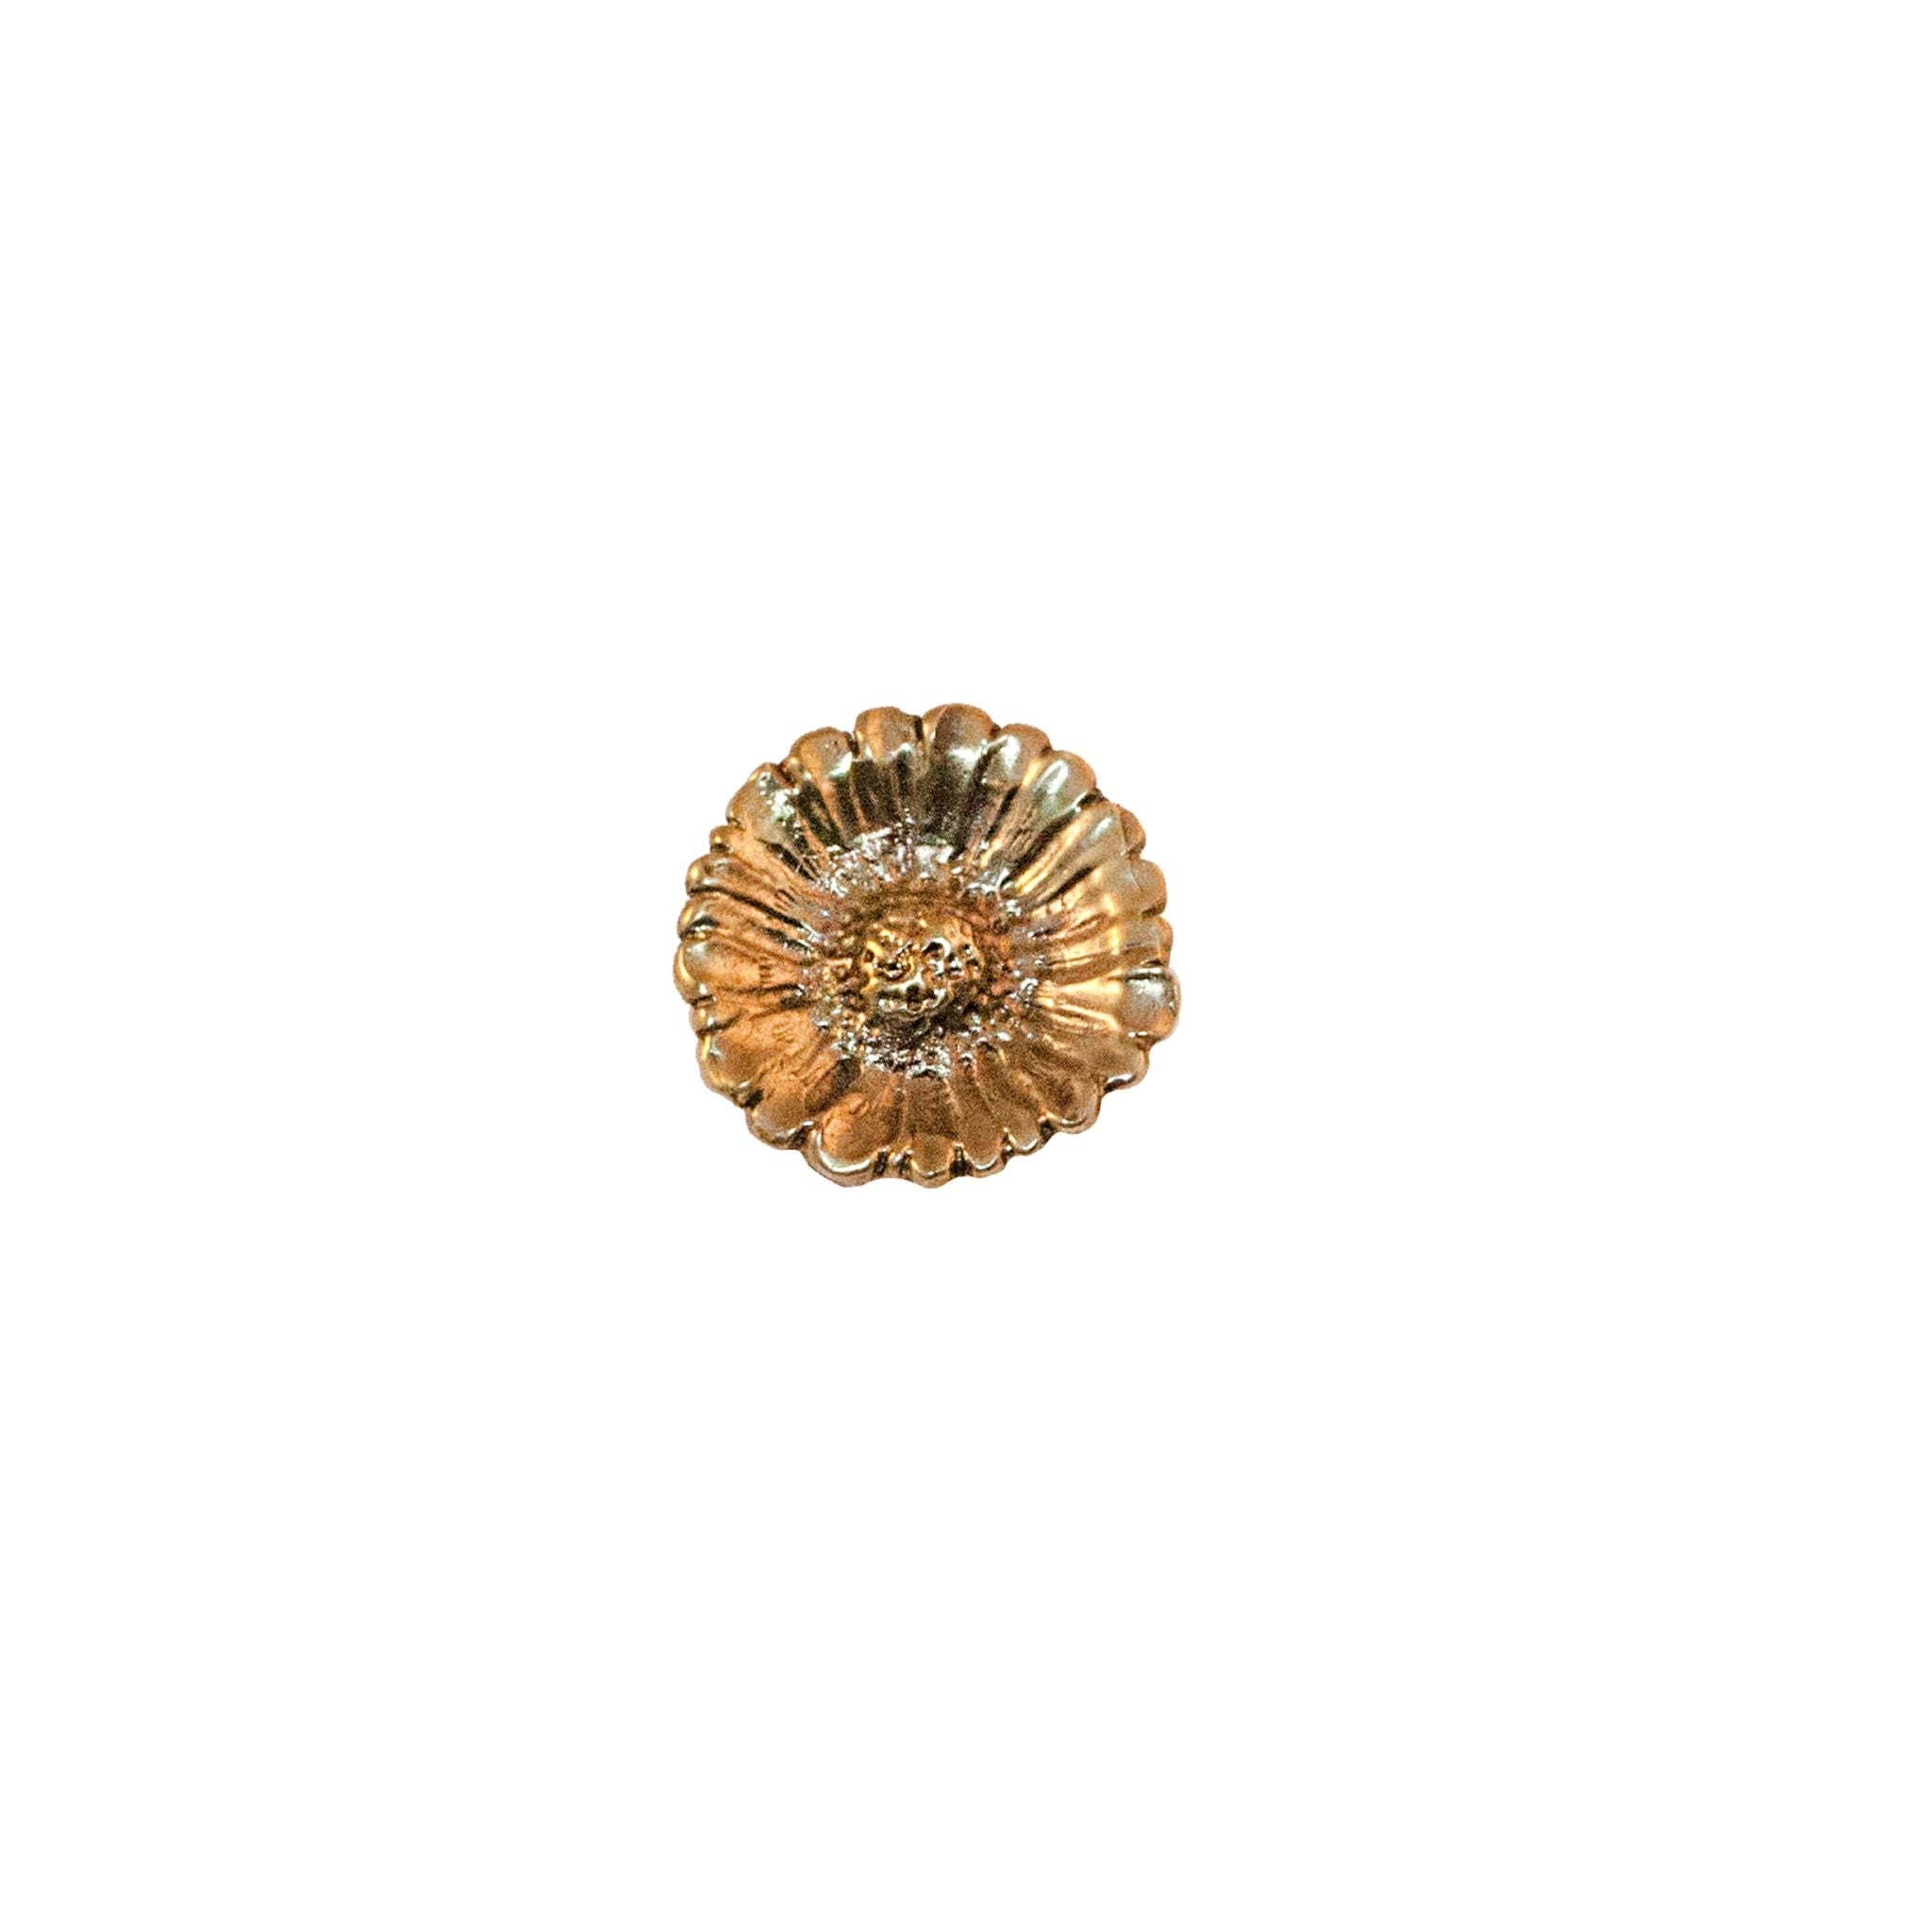 A small brass knob featuring a decorative daisy design, adding floral charm to your decor.